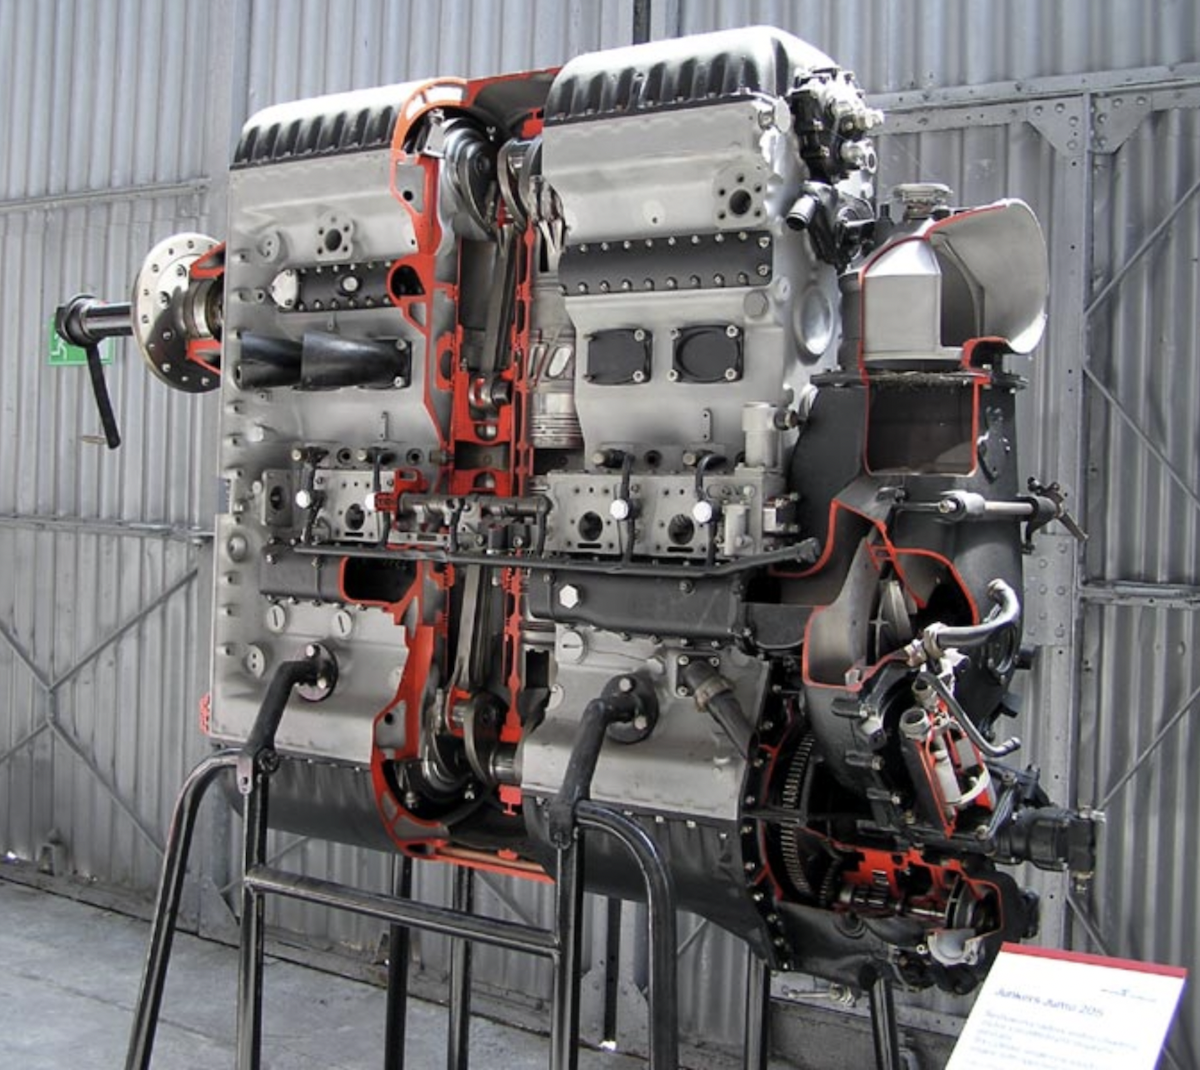 Junkers 205 engine courtesy Kosice Air Museum, Slovakia